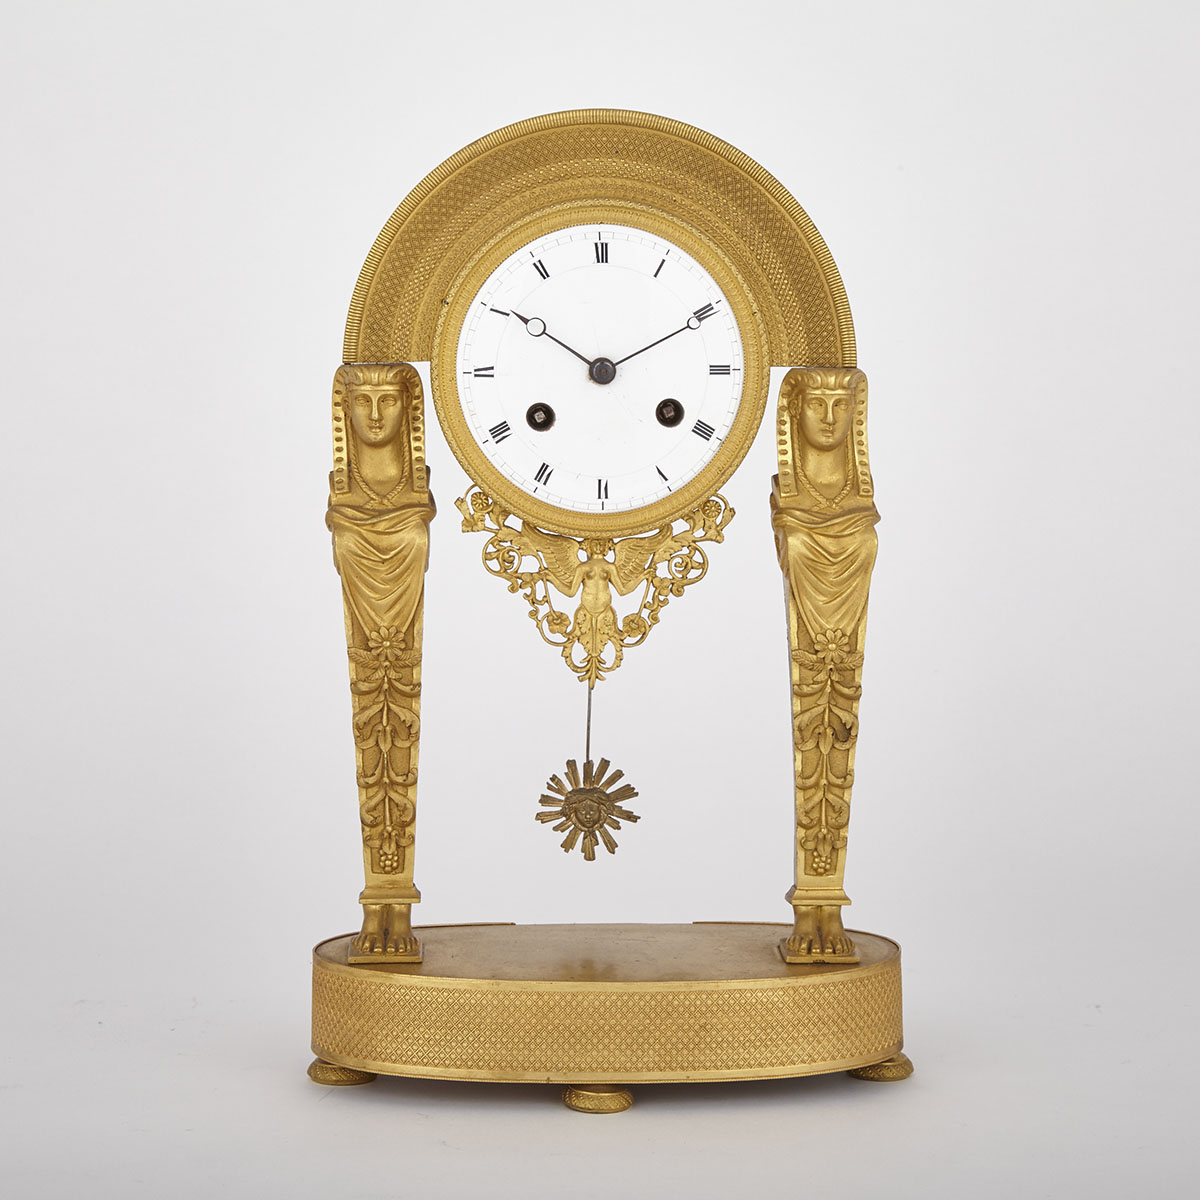 French Directoire Gilt Bronze Mantle Clock, late 18th/early 19th century